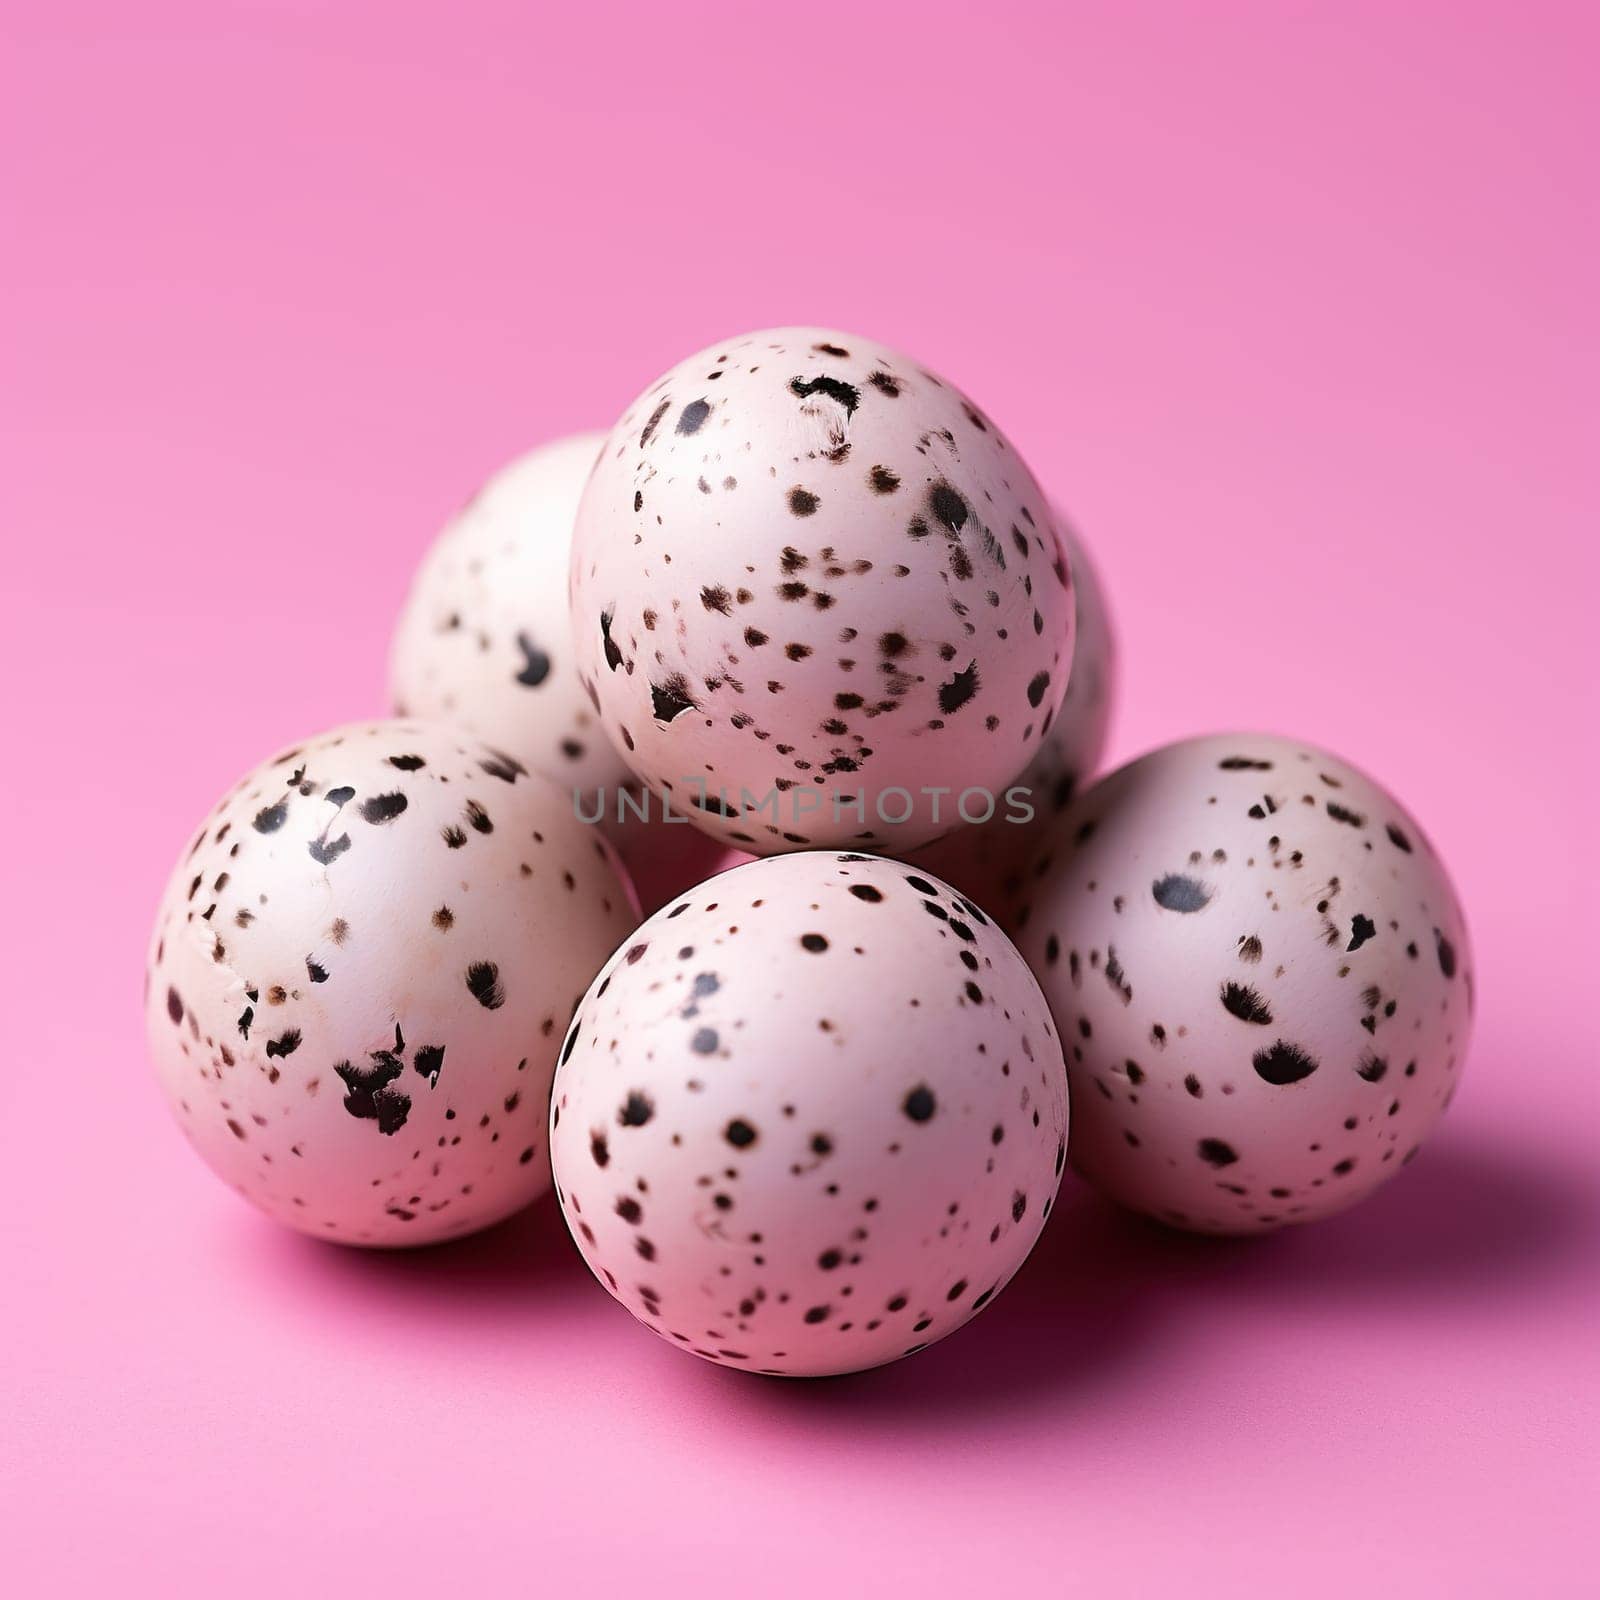 Quail eggs on a pink background.